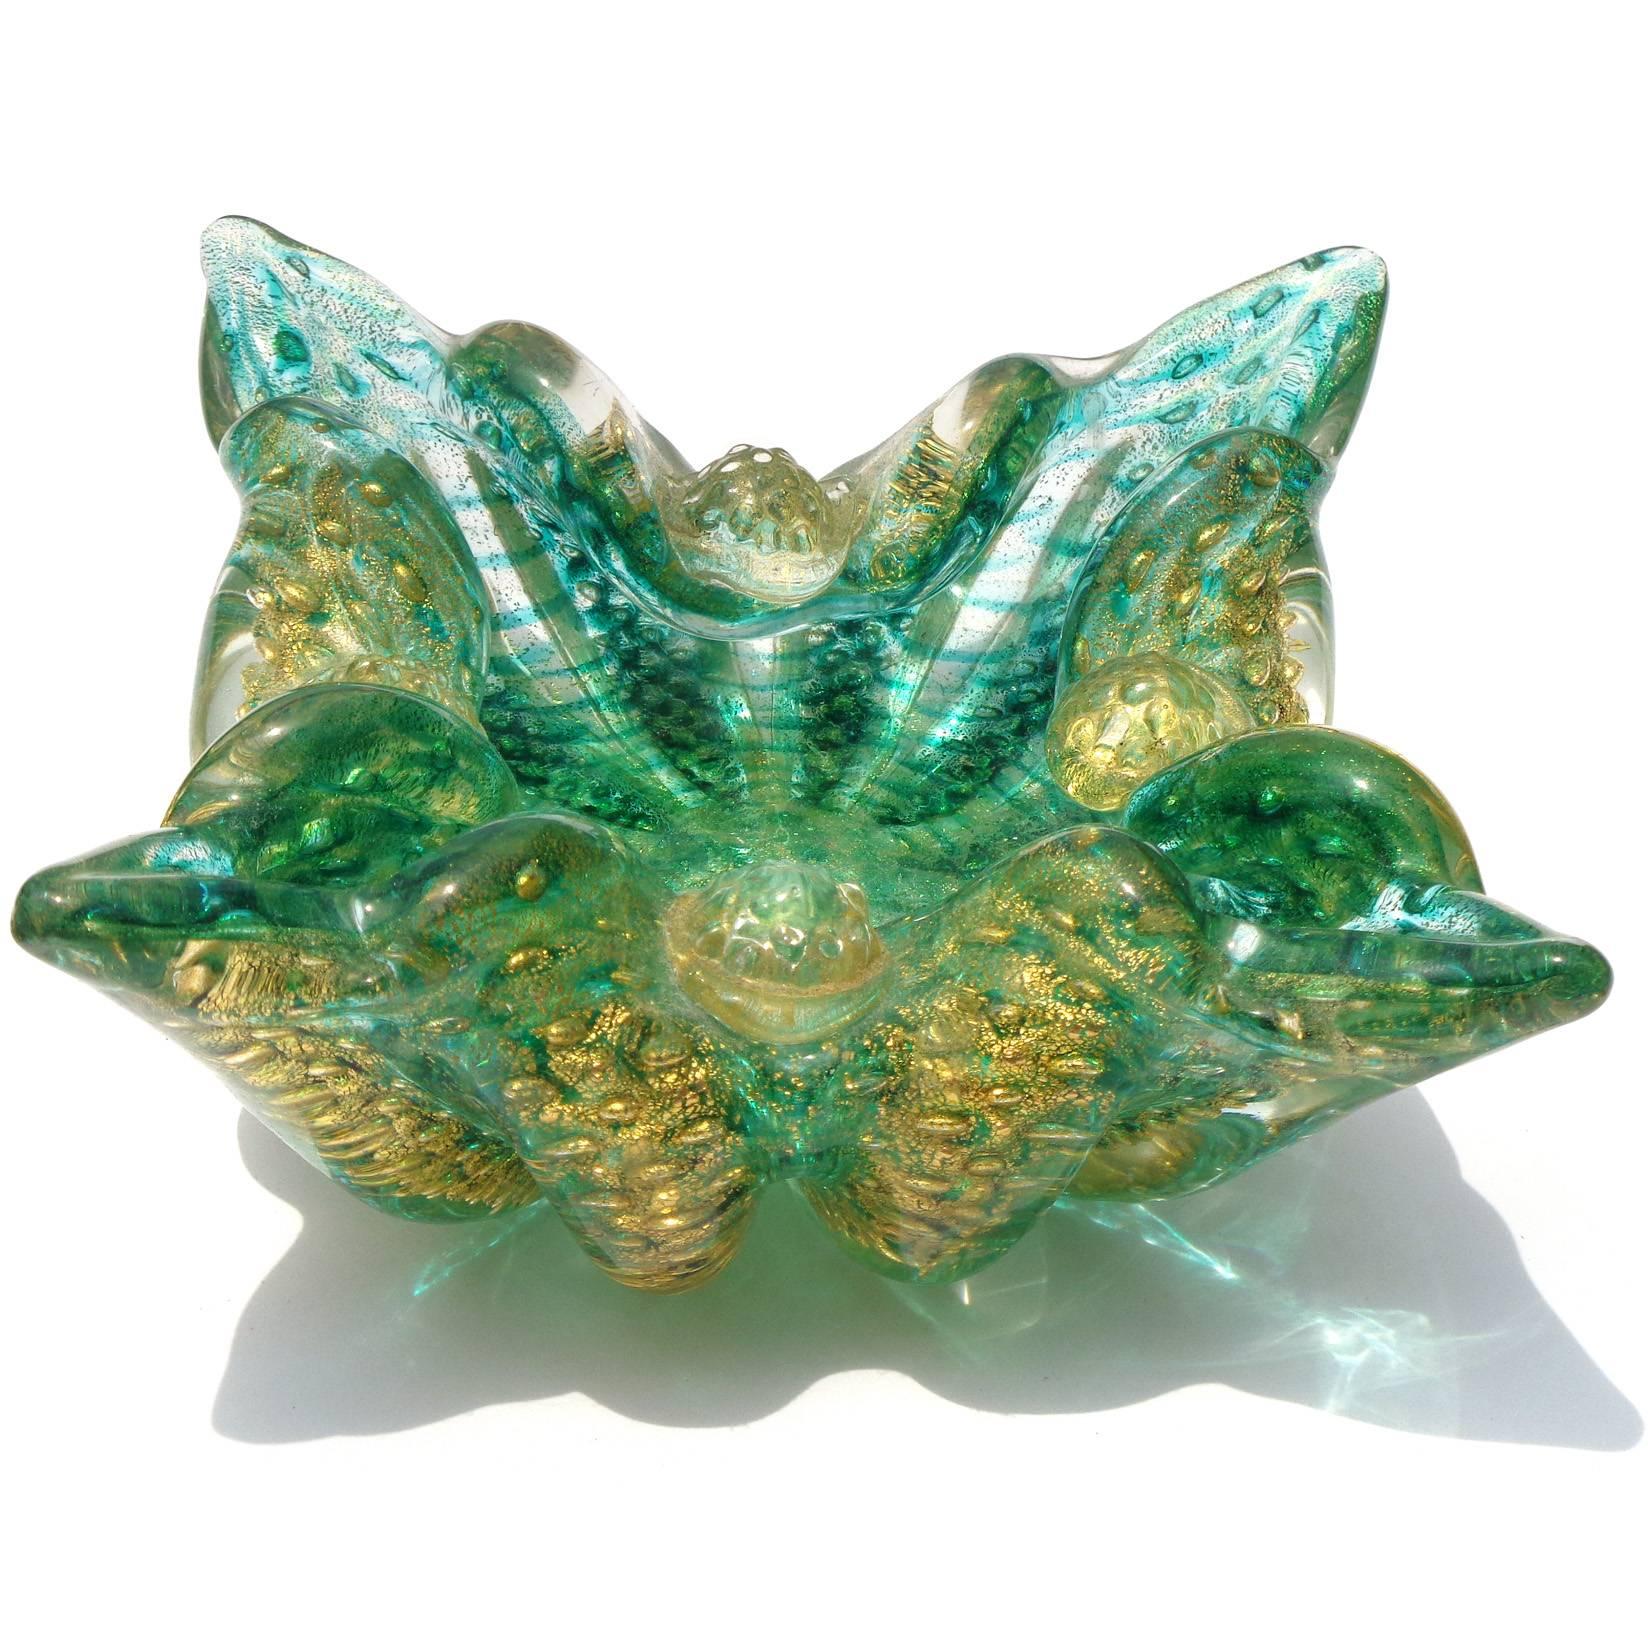 Free shipping worldwide! See details below description.

Beautiful and large Murano hand blown green and gold flecks art glass spike tip bowl with berry decoration. Documented to the Barovier e Toso company, in the 